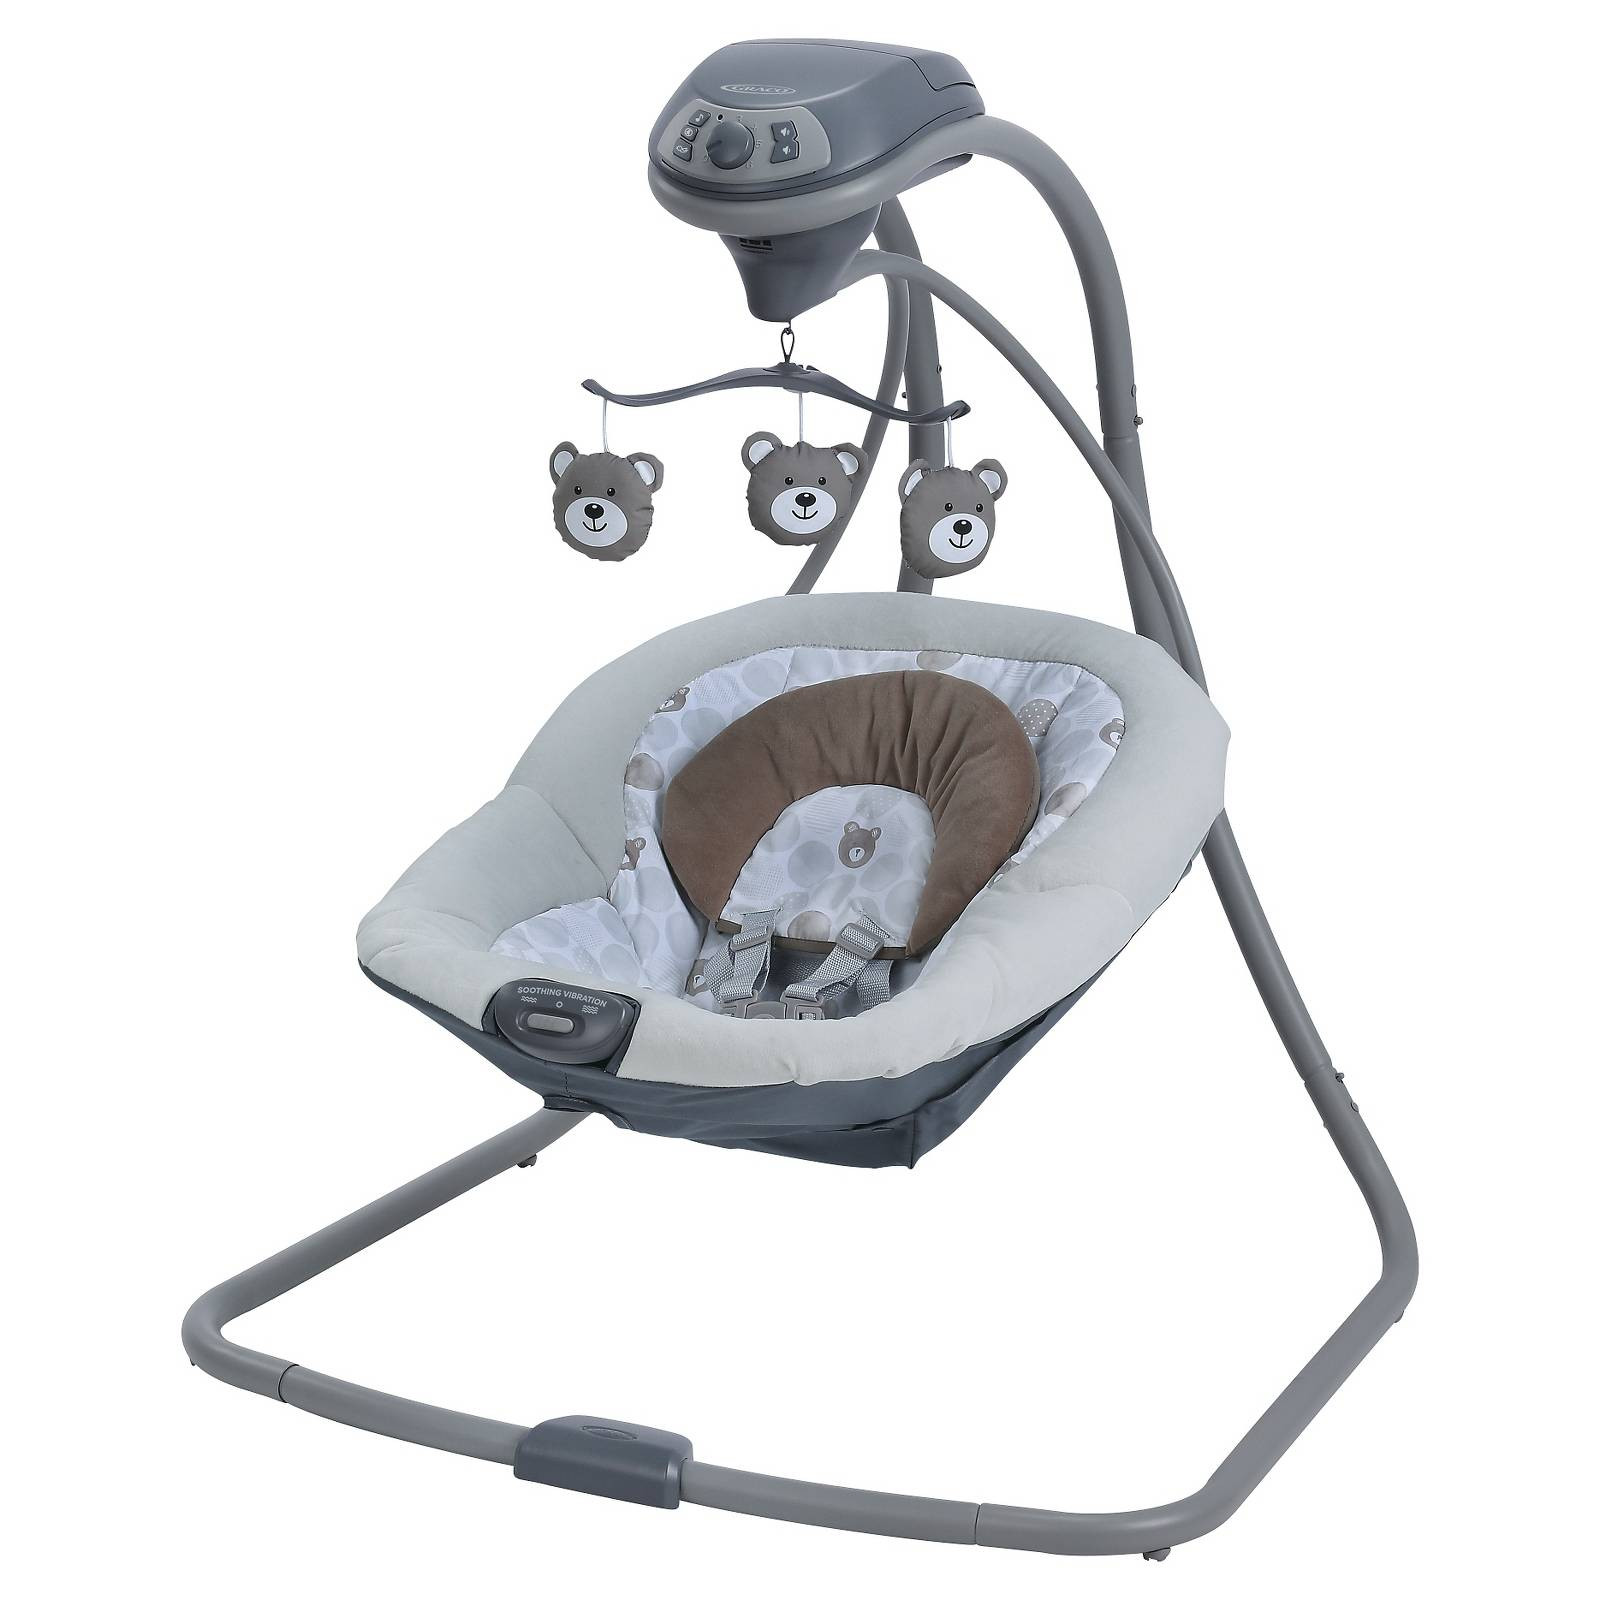 Best ideas about Graco Simple Sway Baby Swing
. Save or Pin Graco Simple Sway LX Baby Swing Now.